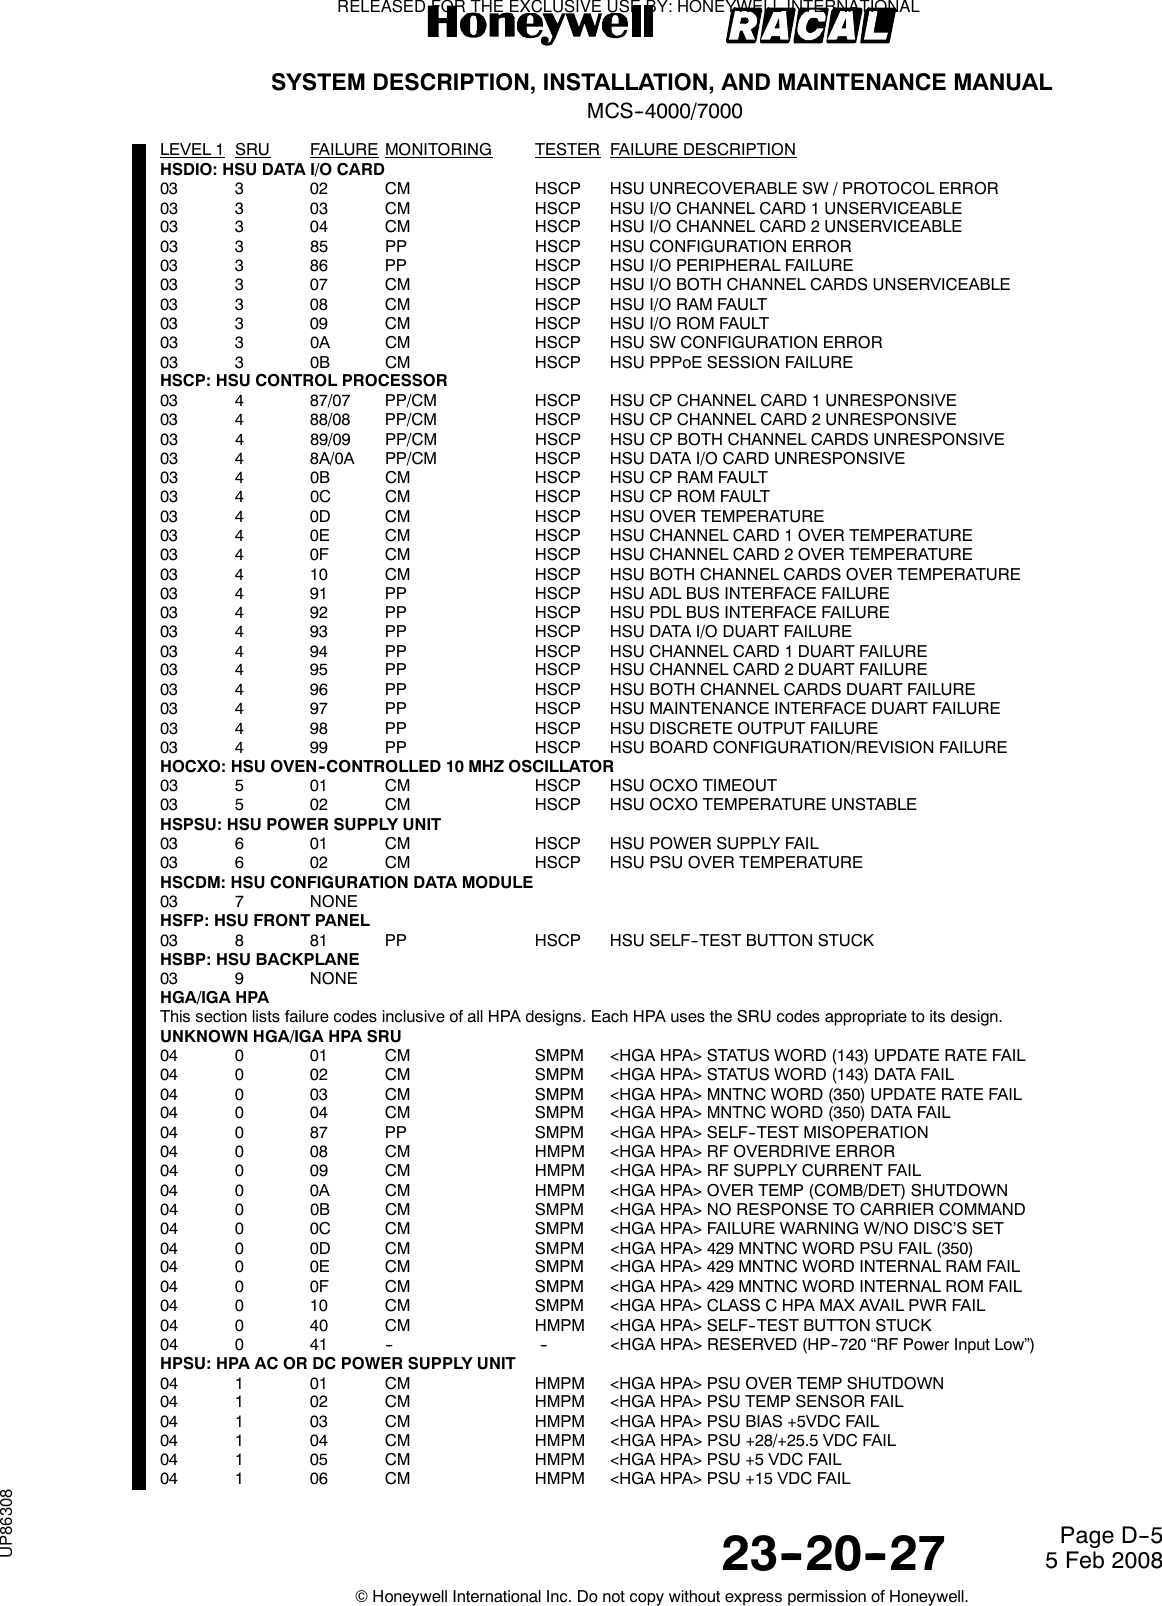 SYSTEM DESCRIPTION, INSTALLATION, AND MAINTENANCE MANUALMCS--4000/700023--20--27 5 Feb 2008©Honeywell International Inc. Do not copy without express permission of Honeywell.Page D--5LEVEL 1 SRU FAILURE MONITORING TESTER FAILURE DESCRIPTIONHSDIO: HSU DATA I/O CARD03 3 02 CM HSCP HSU UNRECOVERABLE SW / PROTOCOL ERROR03 3 03 CM HSCP HSU I/O CHANNEL CARD 1 UNSERVICEABLE03 3 04 CM HSCP HSU I/O CHANNEL CARD 2 UNSERVICEABLE03 3 85 PP HSCP HSU CONFIGURATION ERROR03 3 86 PP HSCP HSU I/O PERIPHERAL FAILURE03 3 07 CM HSCP HSU I/O BOTH CHANNEL CARDS UNSERVICEABLE03 3 08 CM HSCP HSU I/O RAM FAULT03 3 09 CM HSCP HSU I/O ROM FAULT03 3 0A CM HSCP HSU SW CONFIGURATION ERROR03 3 0B CM HSCP HSU PPPoE SESSION FAILUREHSCP: HSU CONTROL PROCESSOR03 4 87/07 PP/CM HSCP HSU CP CHANNEL CARD 1 UNRESPONSIVE03 4 88/08 PP/CM HSCP HSU CP CHANNEL CARD 2 UNRESPONSIVE03 4 89/09 PP/CM HSCP HSU CP BOTH CHANNEL CARDS UNRESPONSIVE03 4 8A/0A PP/CM HSCP HSU DATA I/O CARD UNRESPONSIVE03 4 0B CM HSCP HSU CP RAM FAULT03 4 0C CM HSCP HSU CP ROM FAULT03 4 0D CM HSCP HSU OVER TEMPERATURE03 4 0E CM HSCP HSU CHANNEL CARD 1 OVER TEMPERATURE03 4 0F CM HSCP HSU CHANNEL CARD 2 OVER TEMPERATURE03 4 10 CM HSCP HSU BOTH CHANNEL CARDS OVER TEMPERATURE03 4 91 PP HSCP HSU ADL BUS INTERFACE FAILURE03 4 92 PP HSCP HSU PDL BUS INTERFACE FAILURE03 4 93 PP HSCP HSU DATA I/O DUART FAILURE03 4 94 PP HSCP HSU CHANNEL CARD 1 DUART FAILURE03 4 95 PP HSCP HSU CHANNEL CARD 2 DUART FAILURE03 4 96 PP HSCP HSU BOTH CHANNEL CARDS DUART FAILURE03 4 97 PP HSCP HSU MAINTENANCE INTERFACE DUART FAILURE03 4 98 PP HSCP HSU DISCRETE OUTPUT FAILURE03 4 99 PP HSCP HSU BOARD CONFIGURATION/REVISION FAILUREHOCXO: HSU OVEN--CONTROLLED 10 MHZ OSCILLATOR03 5 01 CM HSCP HSU OCXO TIMEOUT03 5 02 CM HSCP HSU OCXO TEMPERATURE UNSTABLEHSPSU: HSU POWER SUPPLY UNIT03 6 01 CM HSCP HSU POWER SUPPLY FAIL03 6 02 CM HSCP HSU PSU OVER TEMPERATUREHSCDM: HSU CONFIGURATION DATA MODULE03 7 NONEHSFP: HSU FRONT PANEL03 8 81 PP HSCP HSU SELF--TEST BUTTON STUCKHSBP: HSU BACKPLANE03 9 NONEHGA/IGA HPAThis section lists failure codes inclusive of all HPA designs. Each HPA uses the SRU codes appropriate to its design.UNKNOWN HGA/IGA HPA SRU04 0 01 CM SMPM &lt;HGA HPA&gt; STATUS WORD (143) UPDATE RATE FAIL04 0 02 CM SMPM &lt;HGA HPA&gt; STATUS WORD (143) DATA FAIL04 0 03 CM SMPM &lt;HGA HPA&gt; MNTNC WORD (350) UPDATE RATE FAIL04 0 04 CM SMPM &lt;HGA HPA&gt; MNTNC WORD (350) DATA FAIL04 0 87 PP SMPM &lt;HGA HPA&gt; SELF--TEST MISOPERATION04 0 08 CM HMPM &lt;HGA HPA&gt; RF OVERDRIVE ERROR04 0 09 CM HMPM &lt;HGA HPA&gt; RF SUPPLY CURRENT FAIL04 0 0A CM HMPM &lt;HGA HPA&gt; OVER TEMP (COMB/DET) SHUTDOWN04 0 0B CM SMPM &lt;HGA HPA&gt; NO RESPONSE TO CARRIER COMMAND04 0 0C CM SMPM &lt;HGA HPA&gt; FAILURE WARNING W/NO DISC’S SET04 0 0D CM SMPM &lt;HGA HPA&gt; 429 MNTNC WORD PSU FAIL (350)04 0 0E CM SMPM &lt;HGA HPA&gt; 429 MNTNC WORD INTERNAL RAM FAIL04 0 0F CM SMPM &lt;HGA HPA&gt; 429 MNTNC WORD INTERNAL ROM FAIL04 0 10 CM SMPM &lt;HGA HPA&gt; CLASS C HPA MAX AVAIL PWR FAIL04 0 40 CM HMPM &lt;HGA HPA&gt; SELF--TEST BUTTON STUCK04 0 41 -- -- &lt;HGA HPA&gt; RESERVED (HP--720 “RF Power Input Low”)HPSU: HPA AC OR DC POWER SUPPLY UNIT04 1 01 CM HMPM &lt;HGA HPA&gt; PSU OVER TEMP SHUTDOWN04 1 02 CM HMPM &lt;HGA HPA&gt; PSU TEMP SENSOR FAIL04 1 03 CM HMPM &lt;HGA HPA&gt; PSU BIAS +5VDC FAIL04 1 04 CM HMPM &lt;HGA HPA&gt; PSU +28/+25.5 VDC FAIL04 1 05 CM HMPM &lt;HGA HPA&gt; PSU +5 VDC FAIL04 1 06 CM HMPM &lt;HGA HPA&gt; PSU +15 VDC FAILRELEASED FOR THE EXCLUSIVE USE BY: HONEYWELL INTERNATIONALUP86308